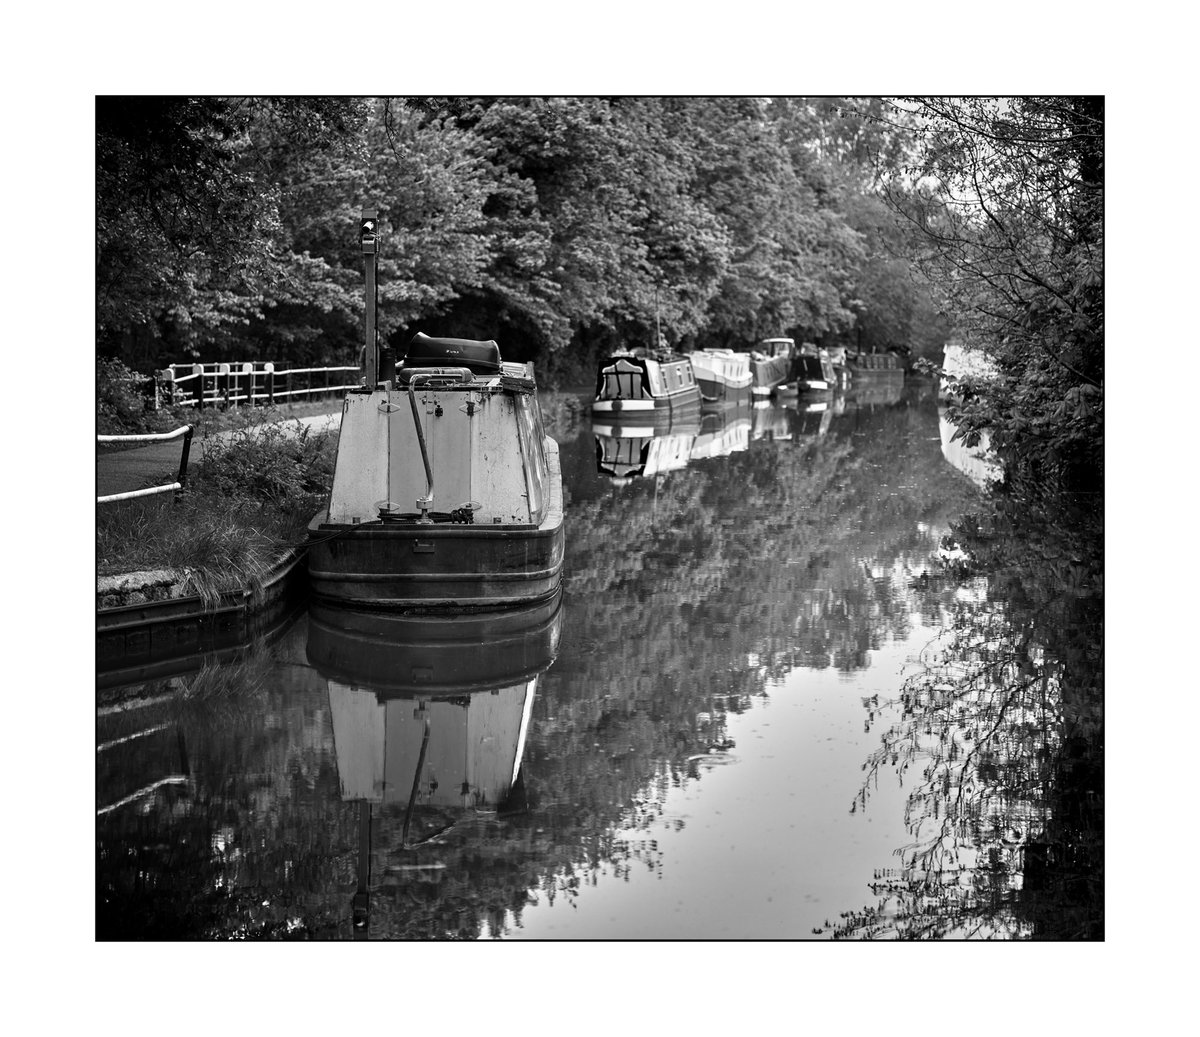 PICTURE OF THE DAY - Oxford canal. #bnw #pictureoftheday #bnwphotography #CarlZeiss #blackandwhitephotography #blackandwhite #fineartphotography #urbanphotography #Oxford #canal #CamboWRS #PhaseOne @rosie_thomo9